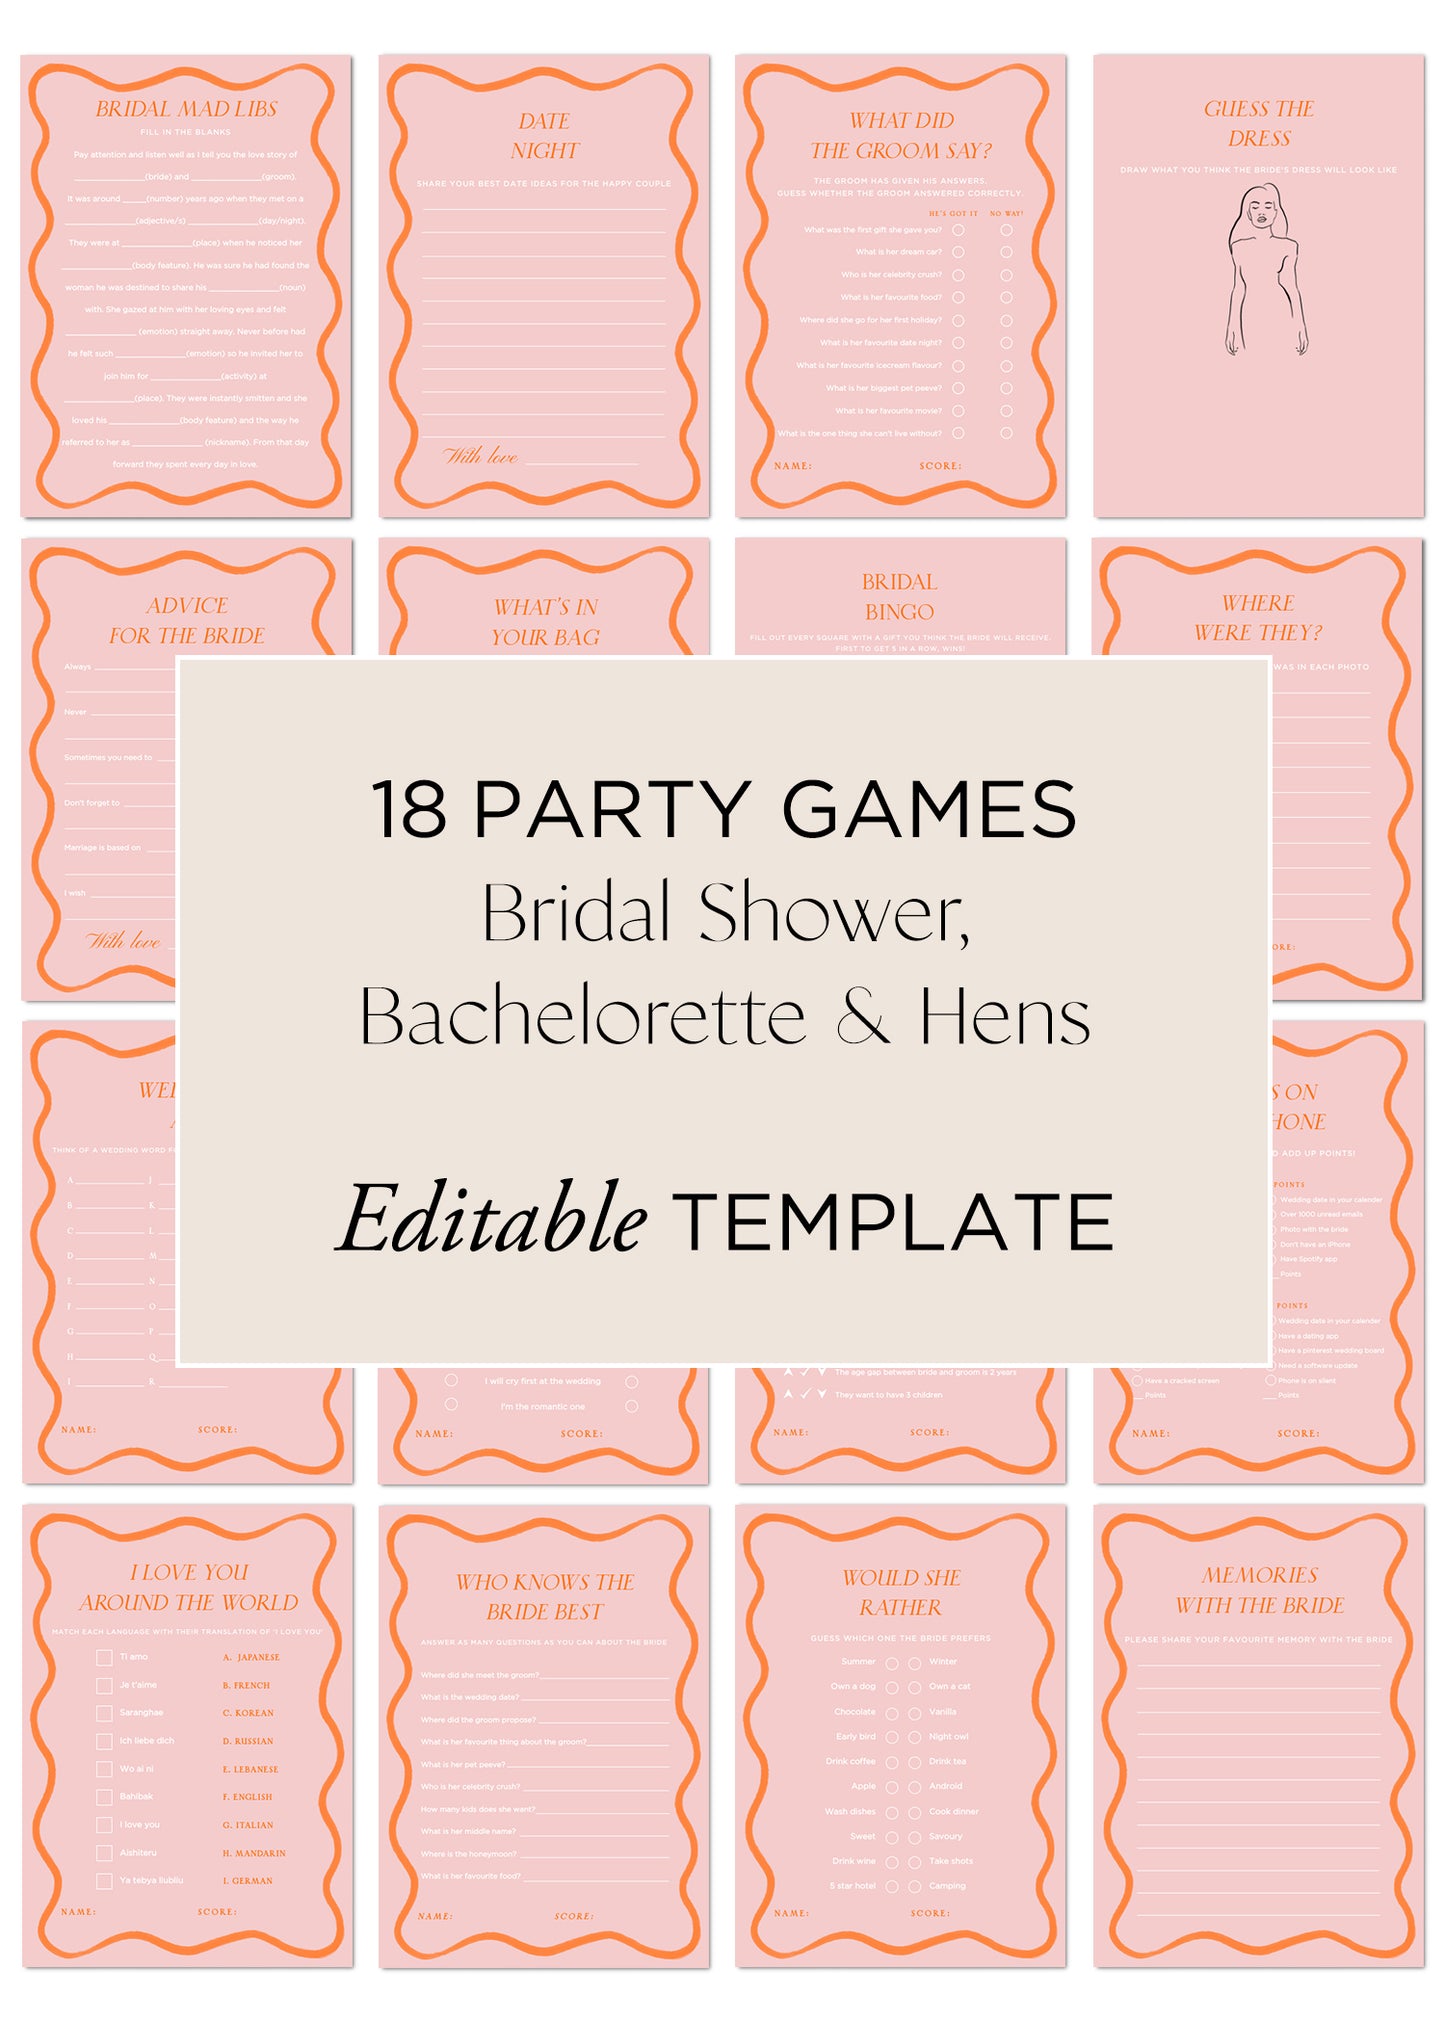 Hens Bachelorette Party Games Editable Template - Wavy - Vorfreude Stationery